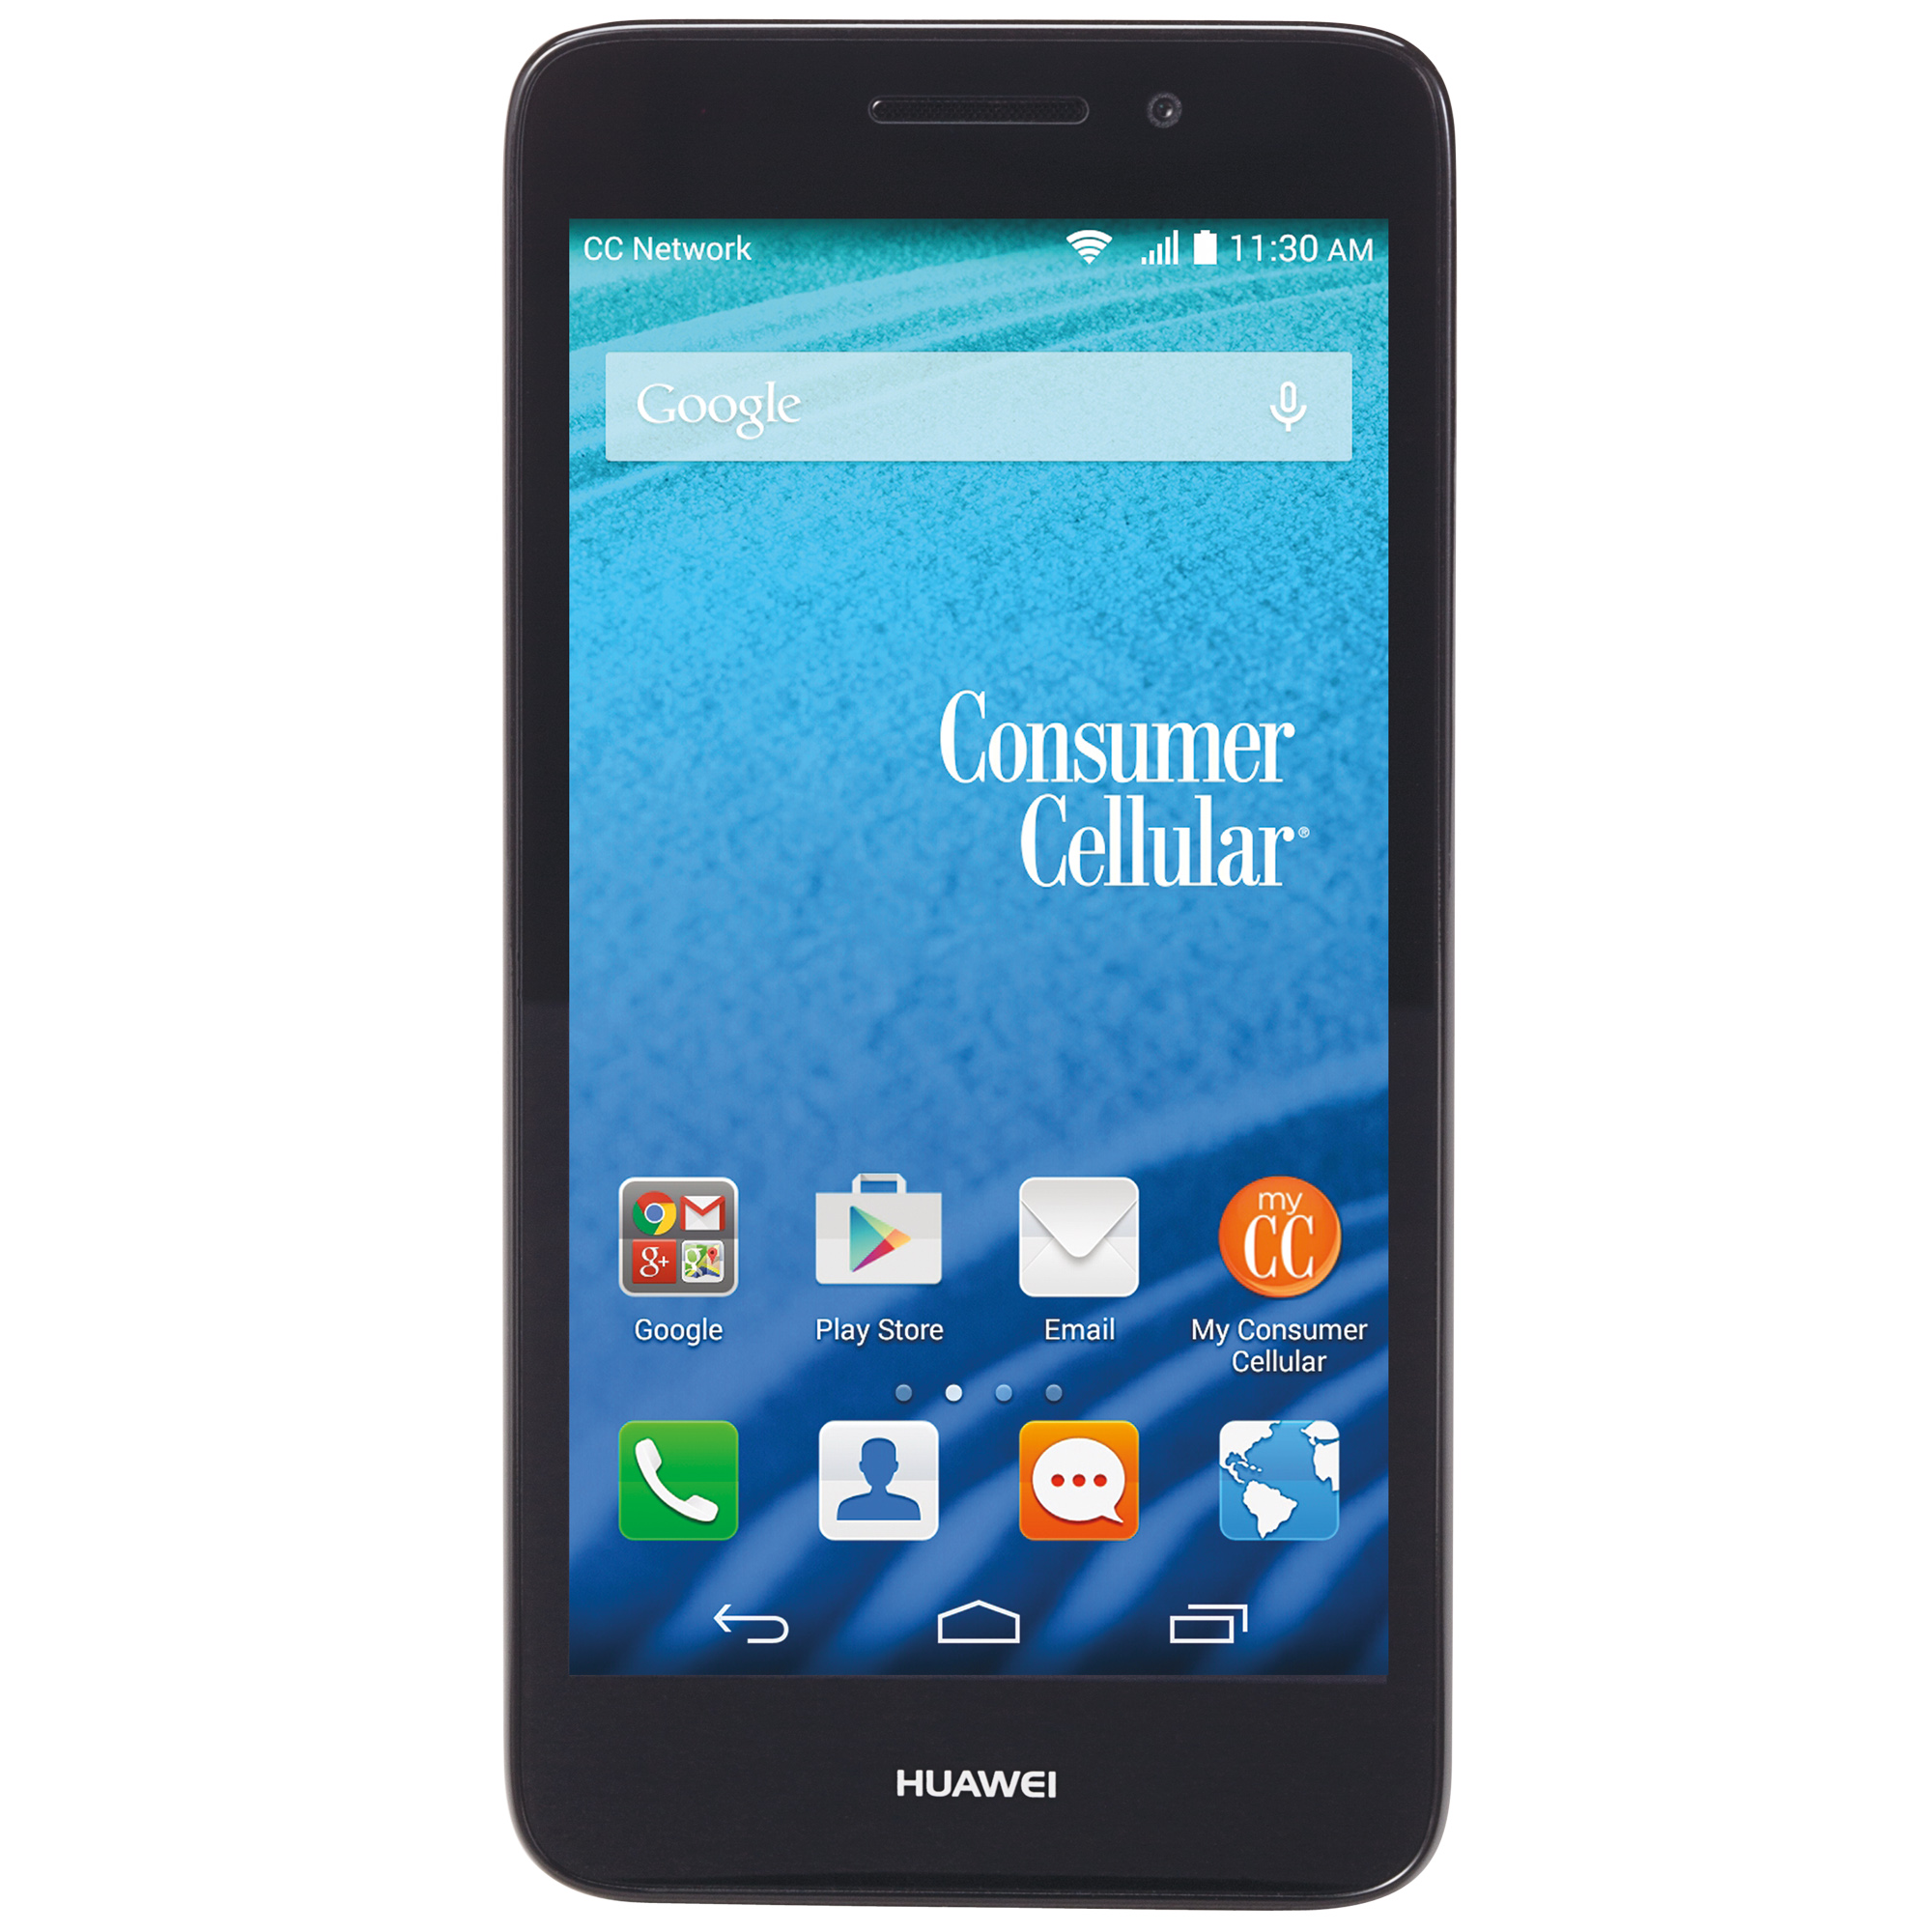 CELL PHONES THAT ARE CONSUMER CELLULAR COMPATIBLE